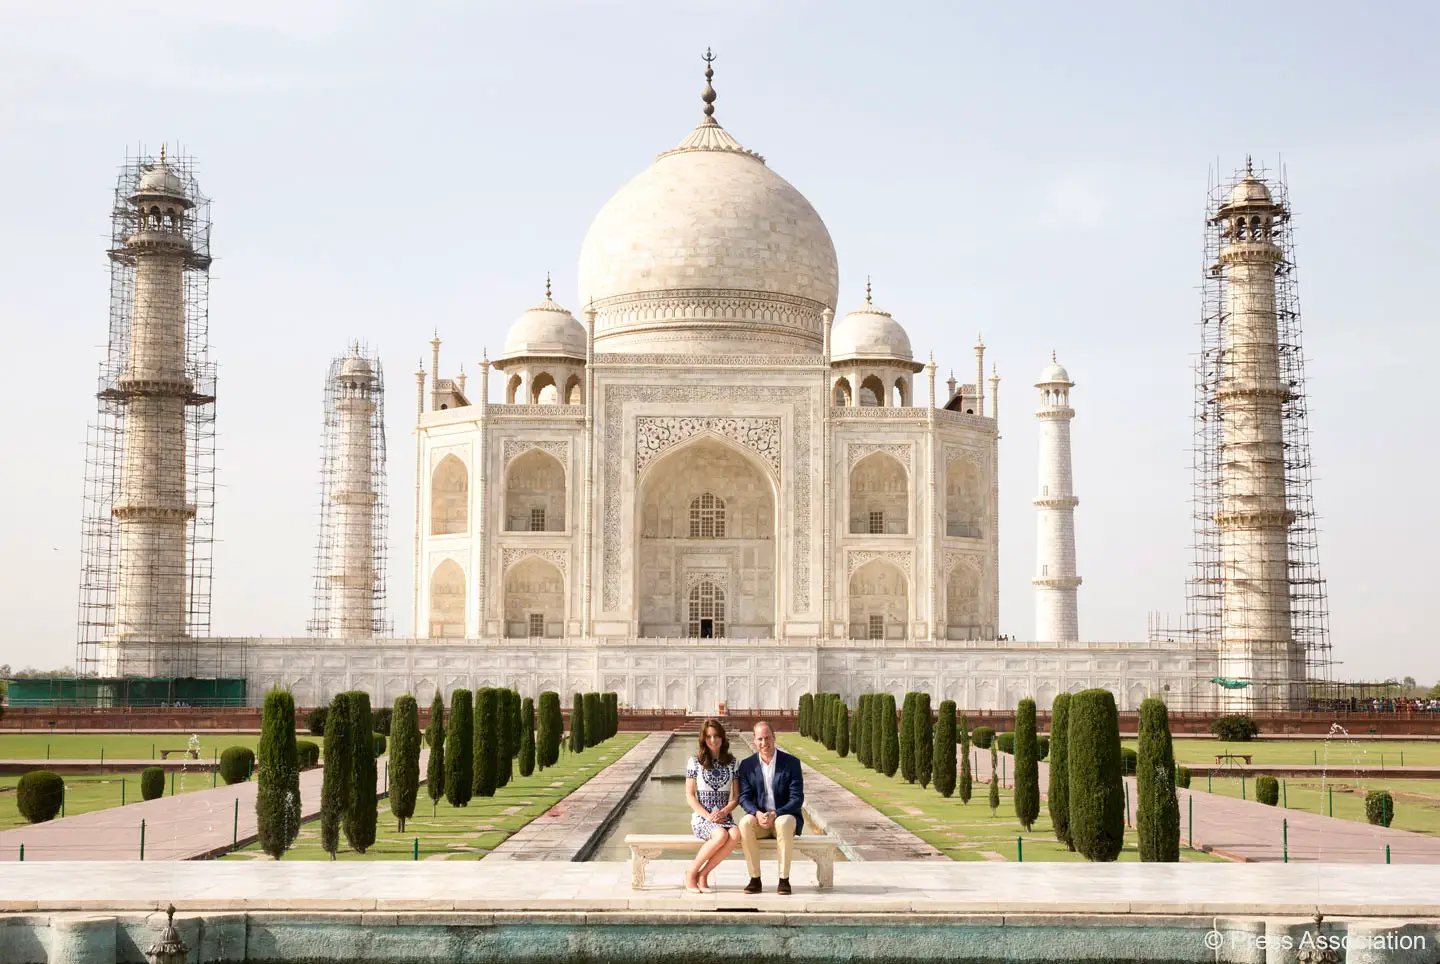 The Duke and Duchess of Cambridge ended the successful India and Bhutan tour with a visit to India's most iconic landmark - The Taj Mahal